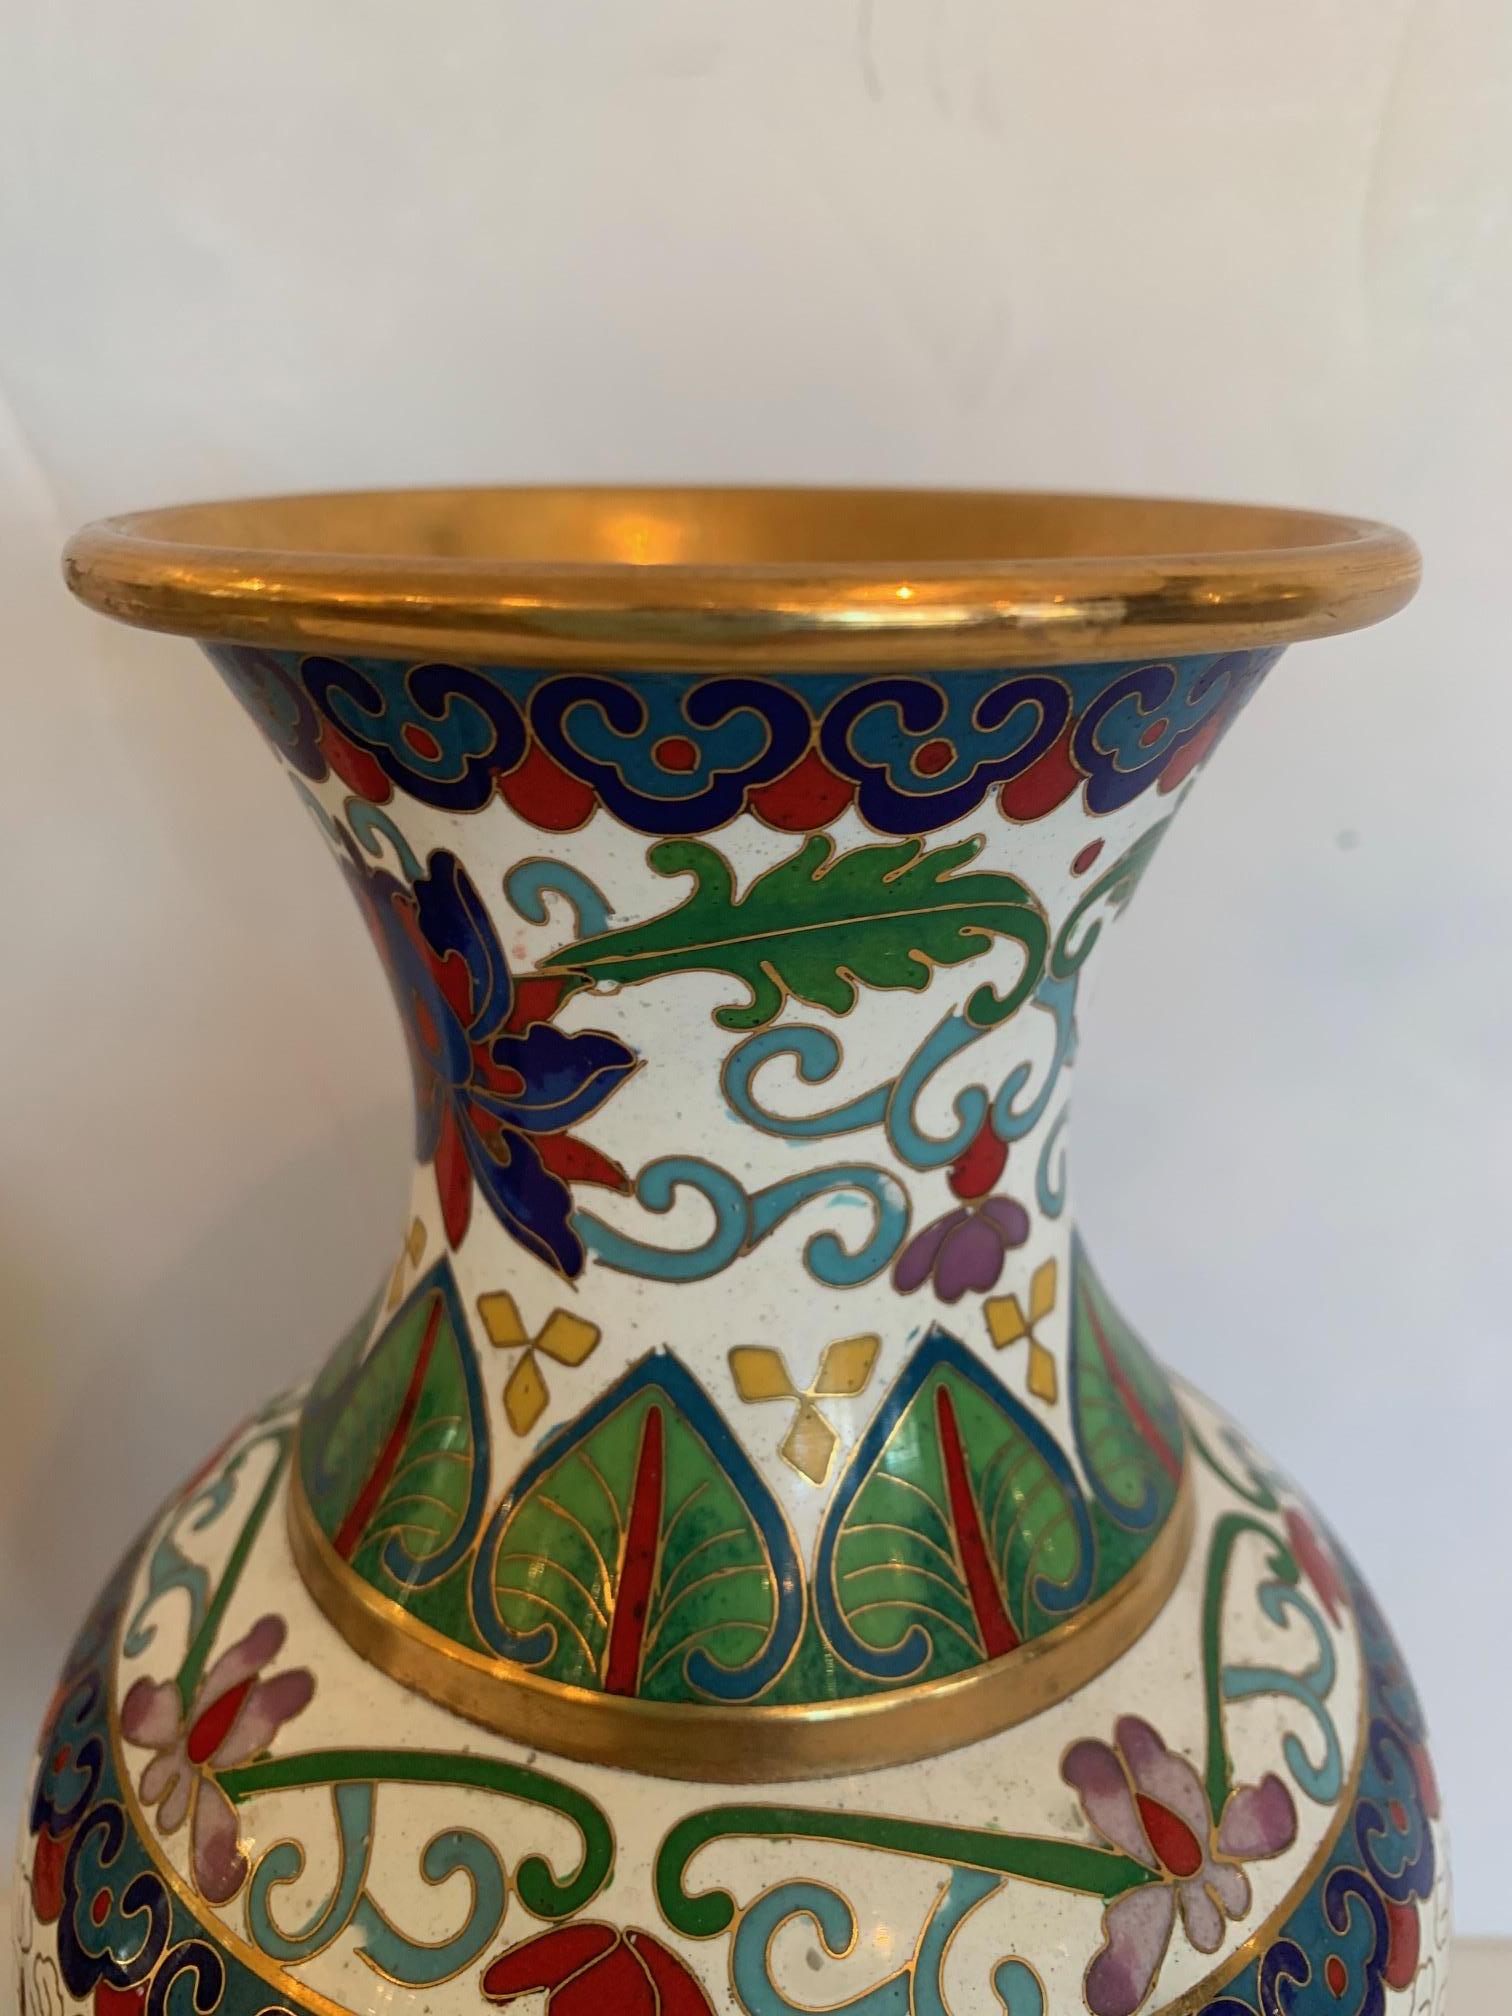 Chinese Export Delightful Pair of Colorful Asian Cloisonné Enamel Vases on Carved Wooden Bases